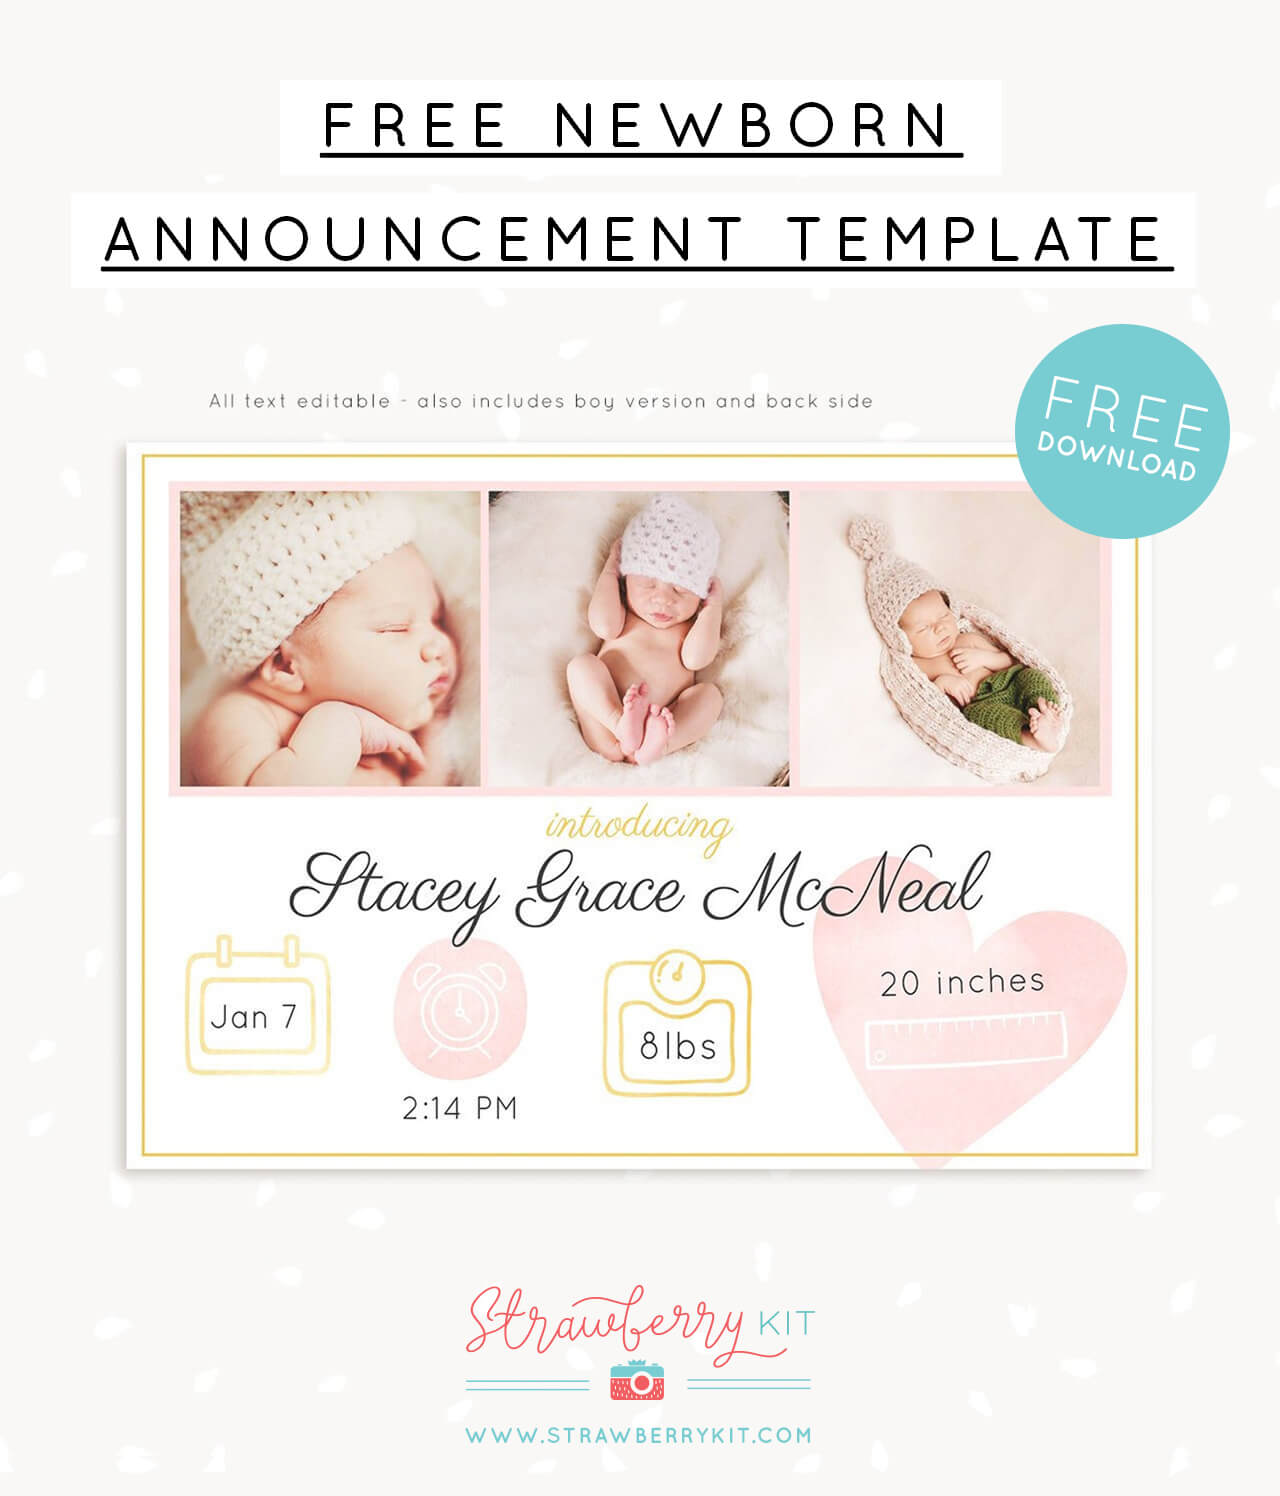 Free birth announcement template for Strawberry Kit